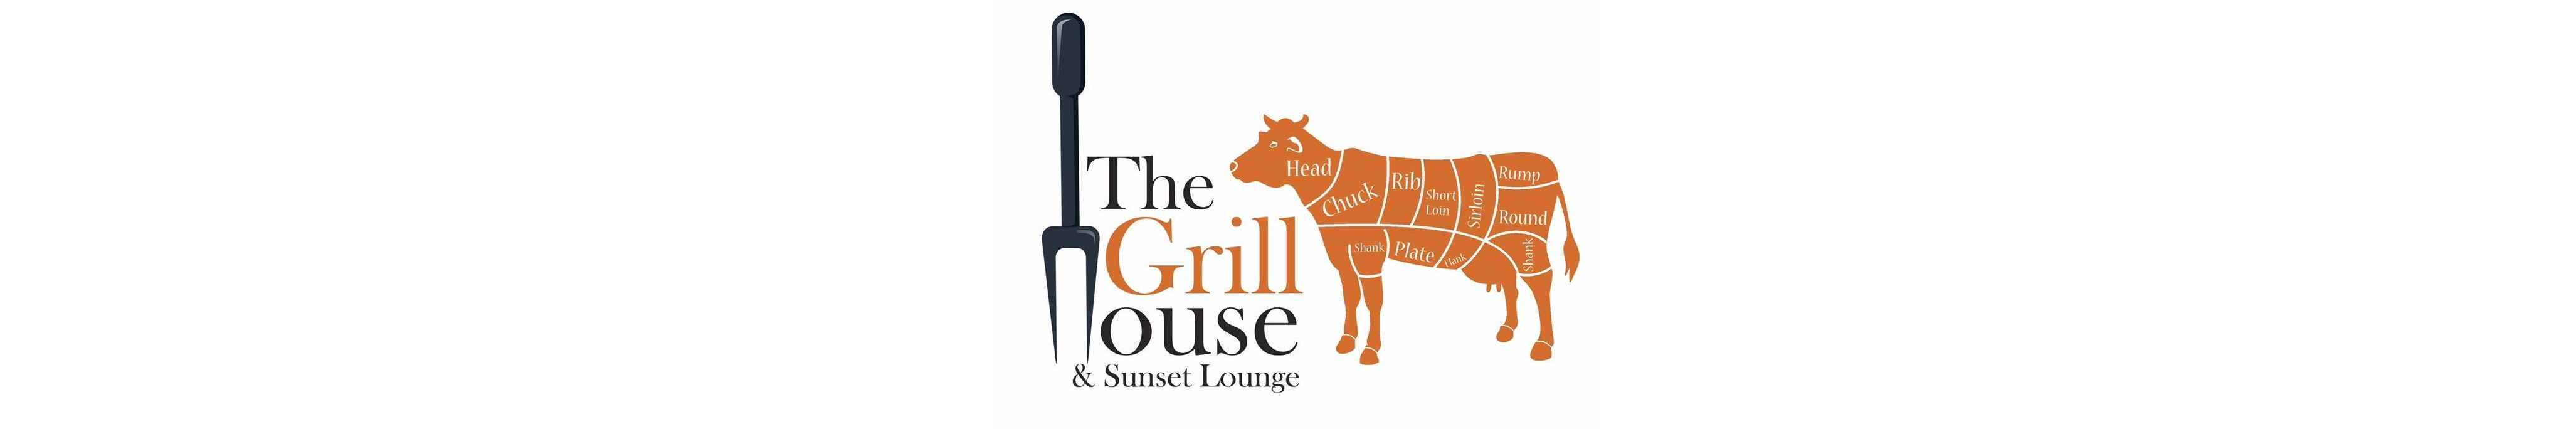 The Grill House Bar and Restaurant in Torrox